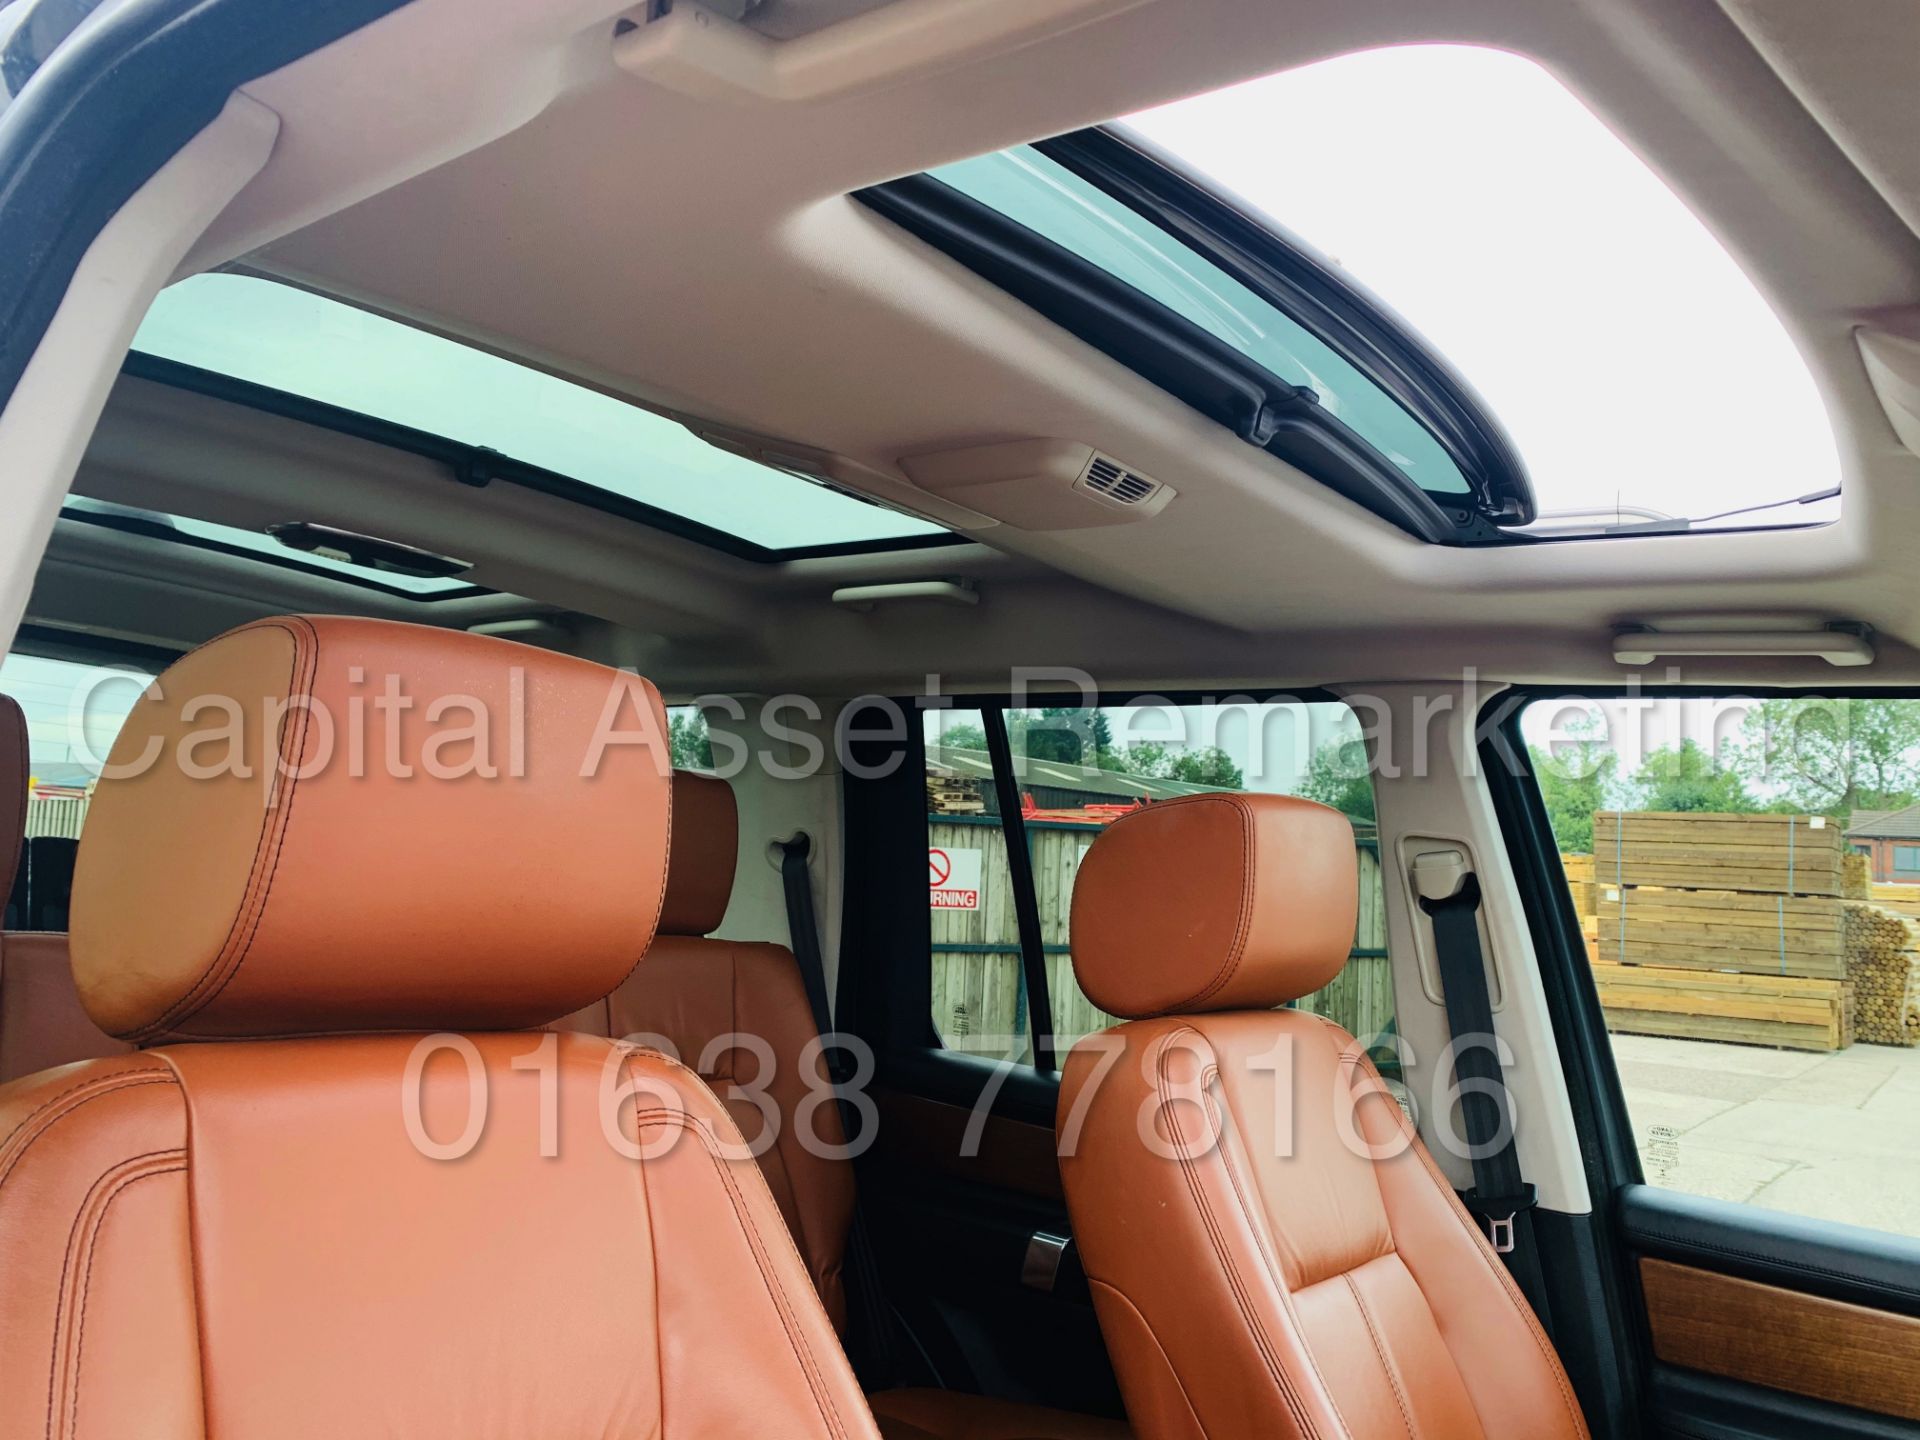 (On Sale) LAND ROVER DISCOVERY 4 *LANDMARK* 7 SEATER SUV (2016) '3.0 SDV6 - 8 SPEED AUTO' (1 OWNER) - Image 47 of 65